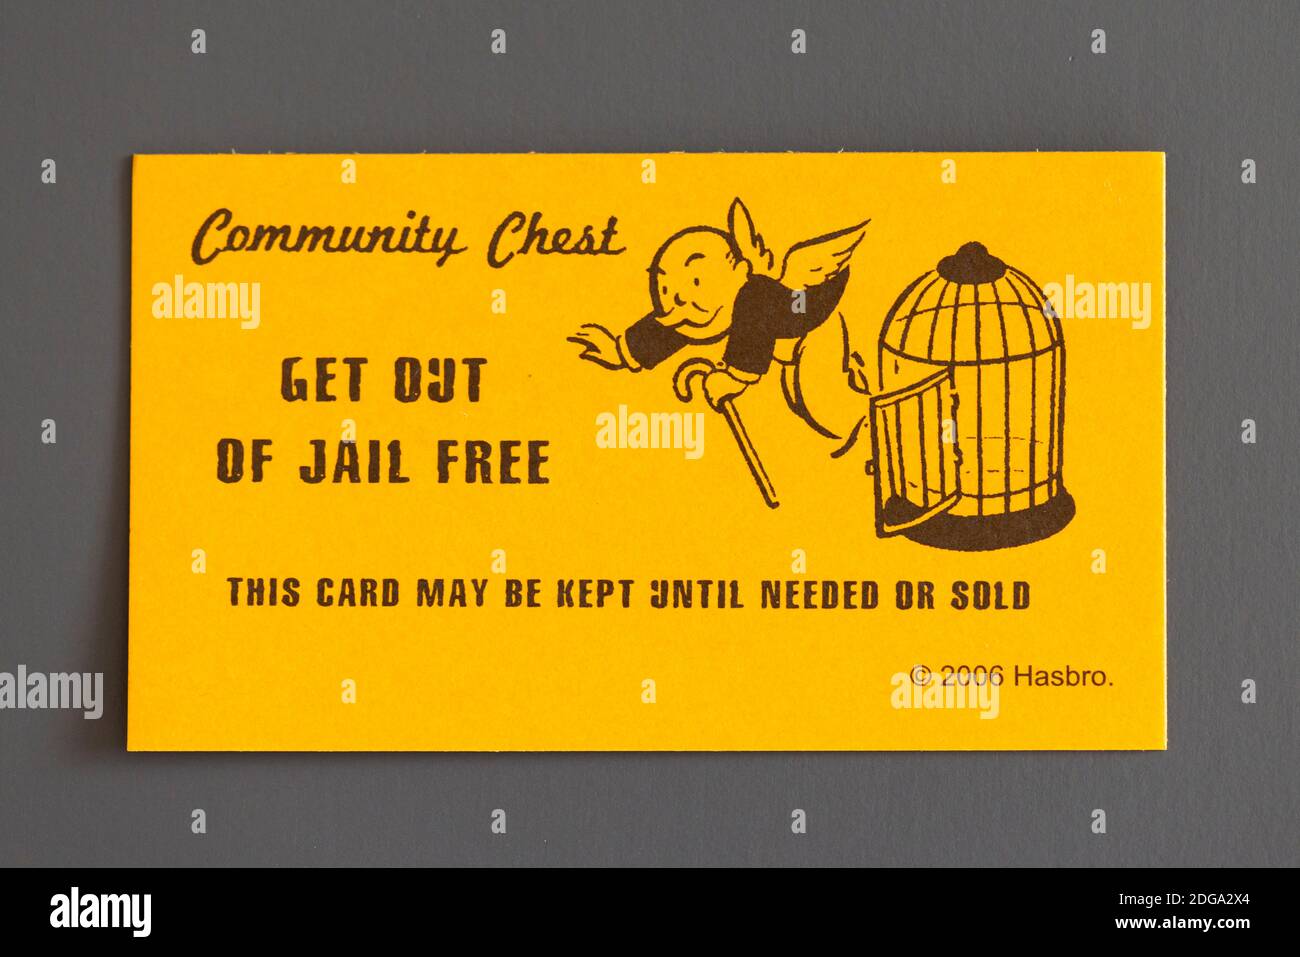 a-community-chest-get-out-of-jail-free-card-from-monopoly-stock-photo